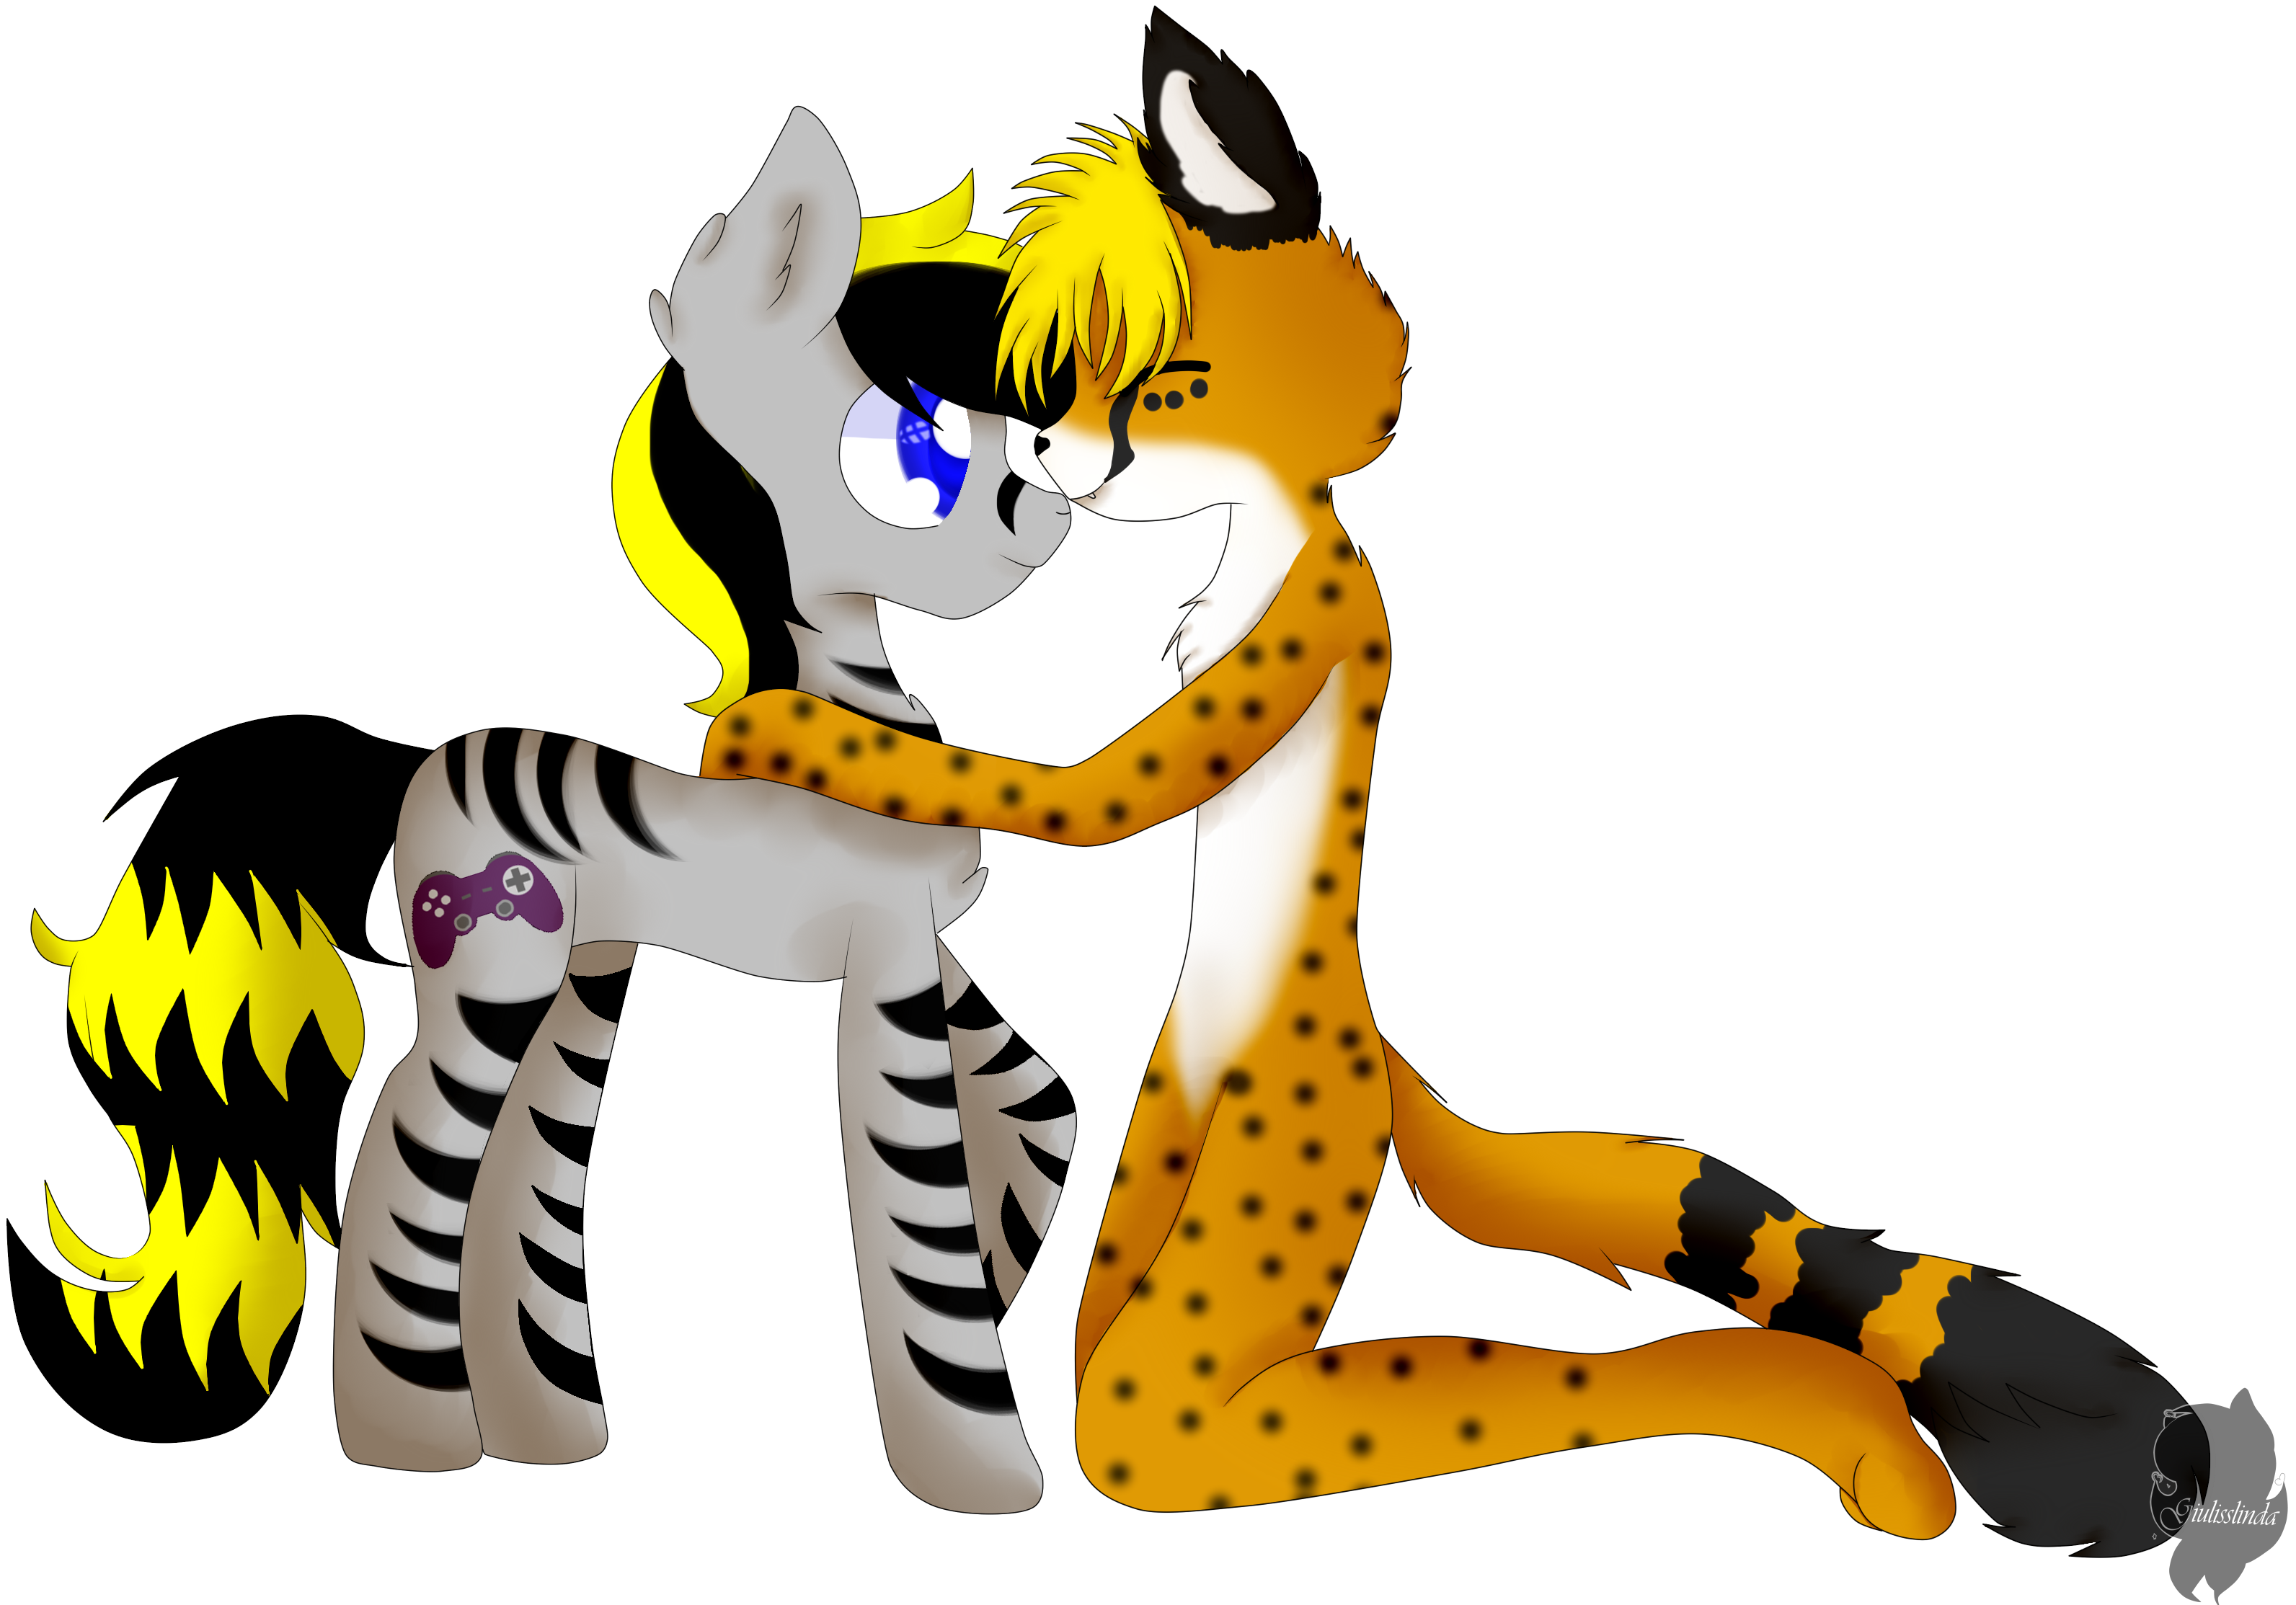 Cheetah And Sly By Gameponysly Cheetah And Sly By Gameponysly - Cartoon (3336x2469)